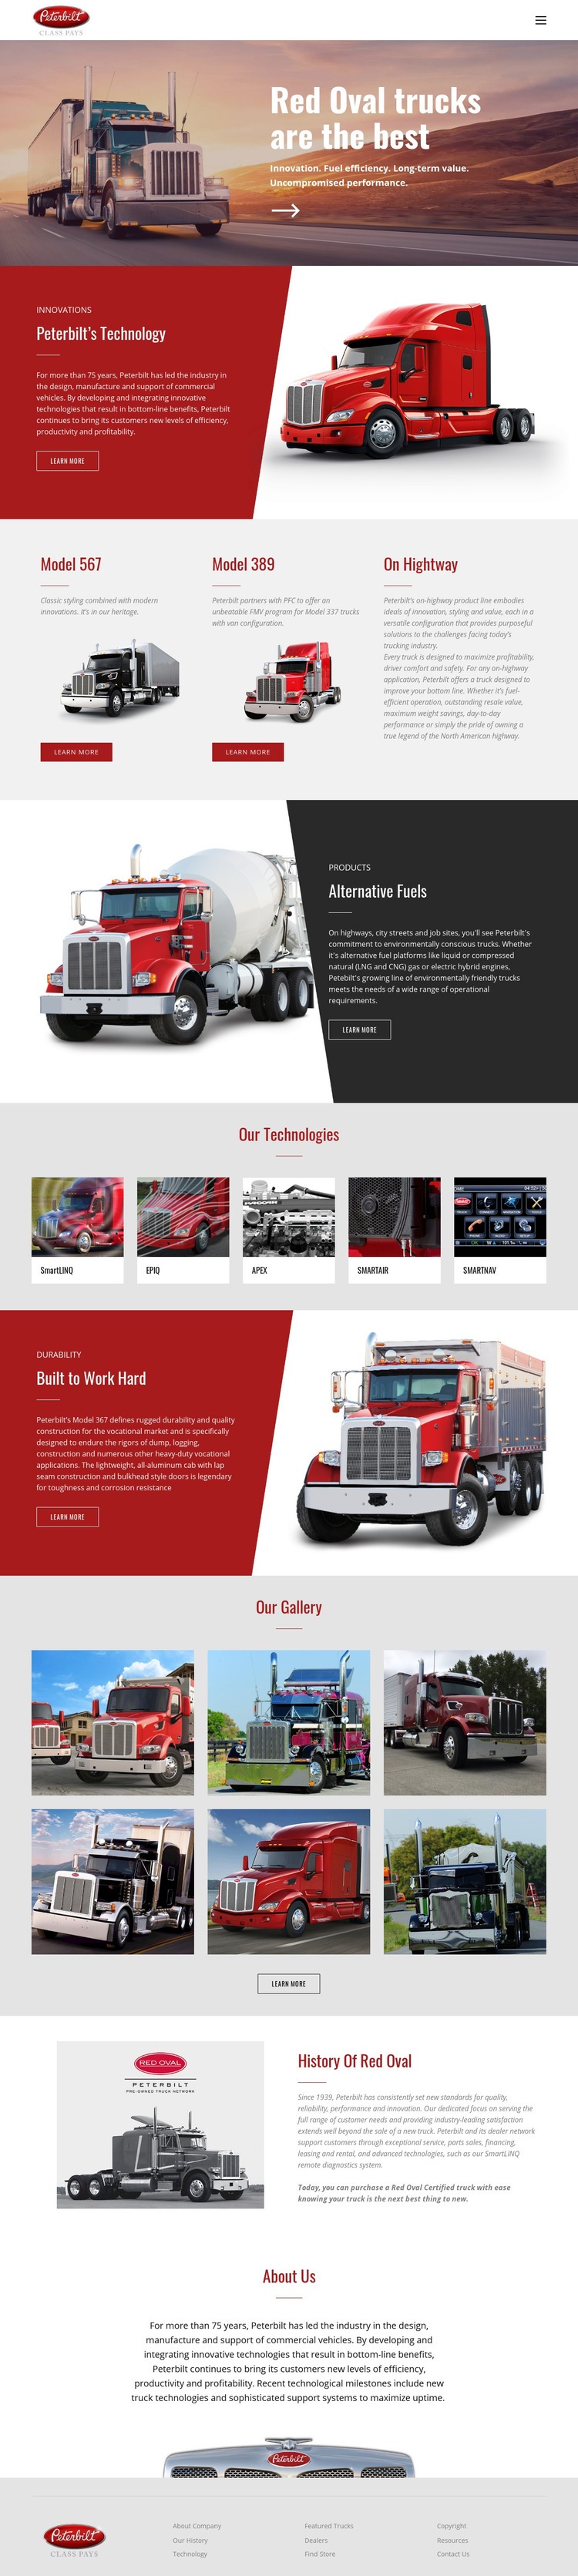 Red oval truck transportaion Html Code Example